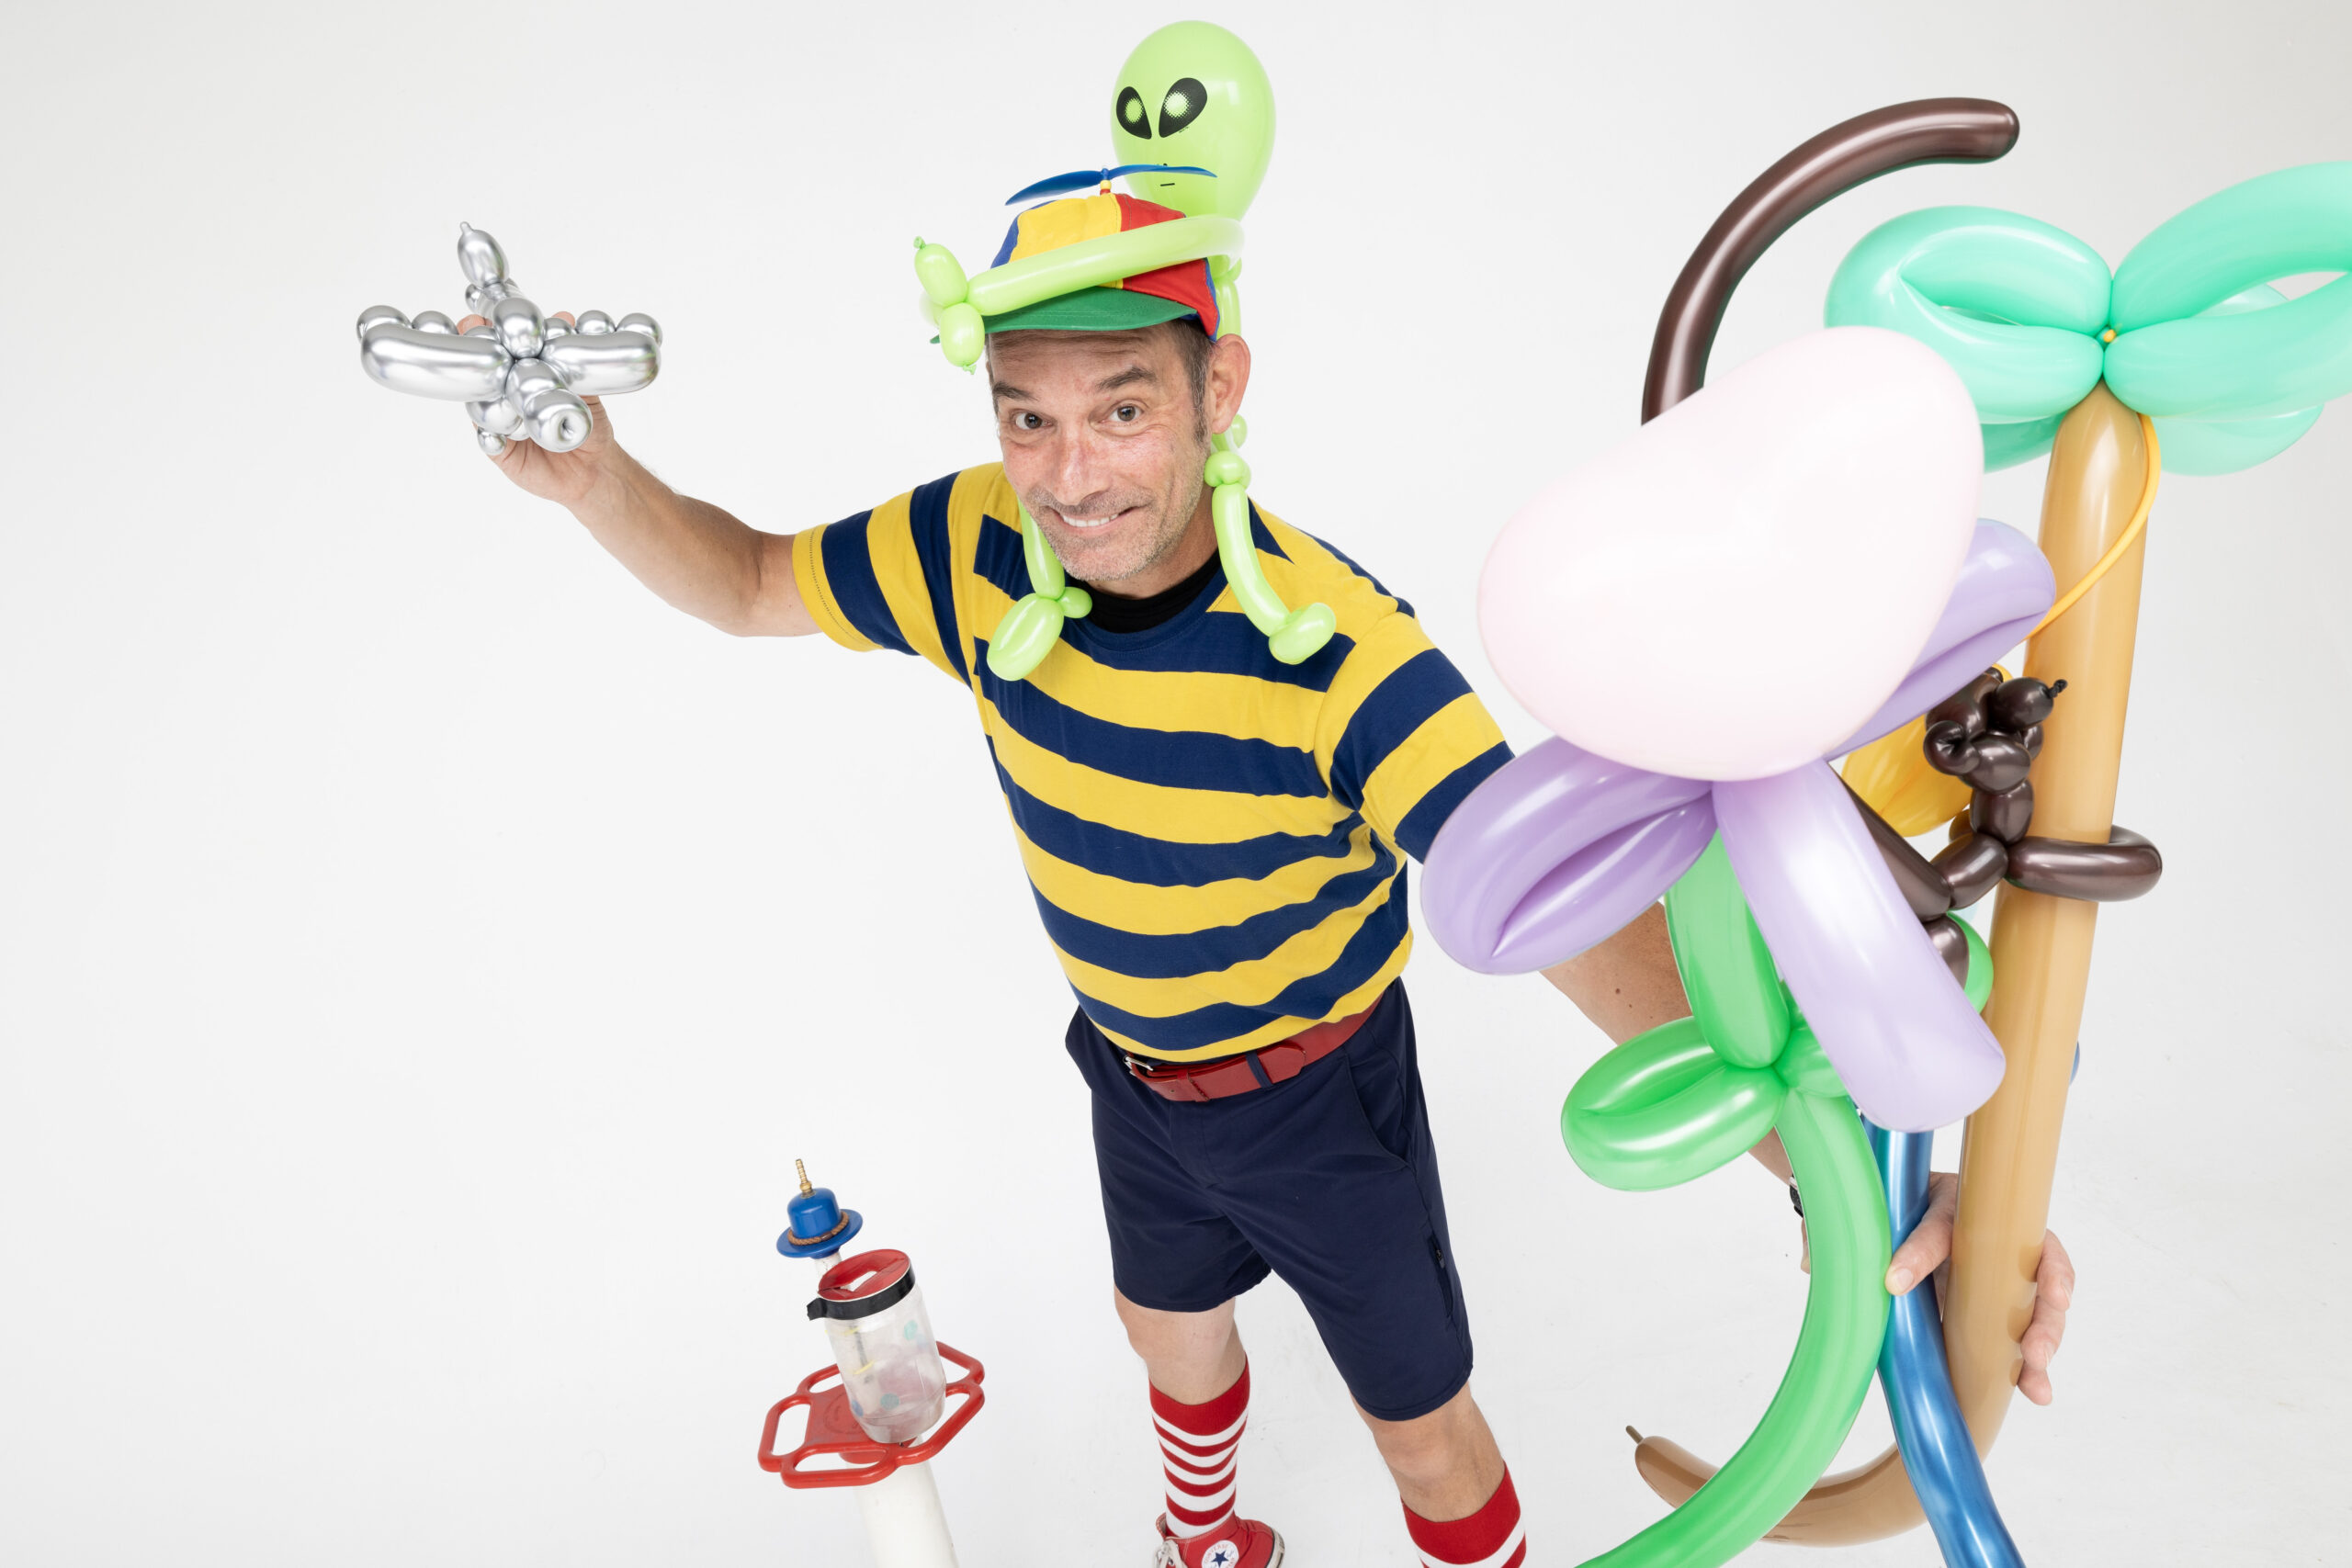 Entertainer with balloon sculptures on white background.